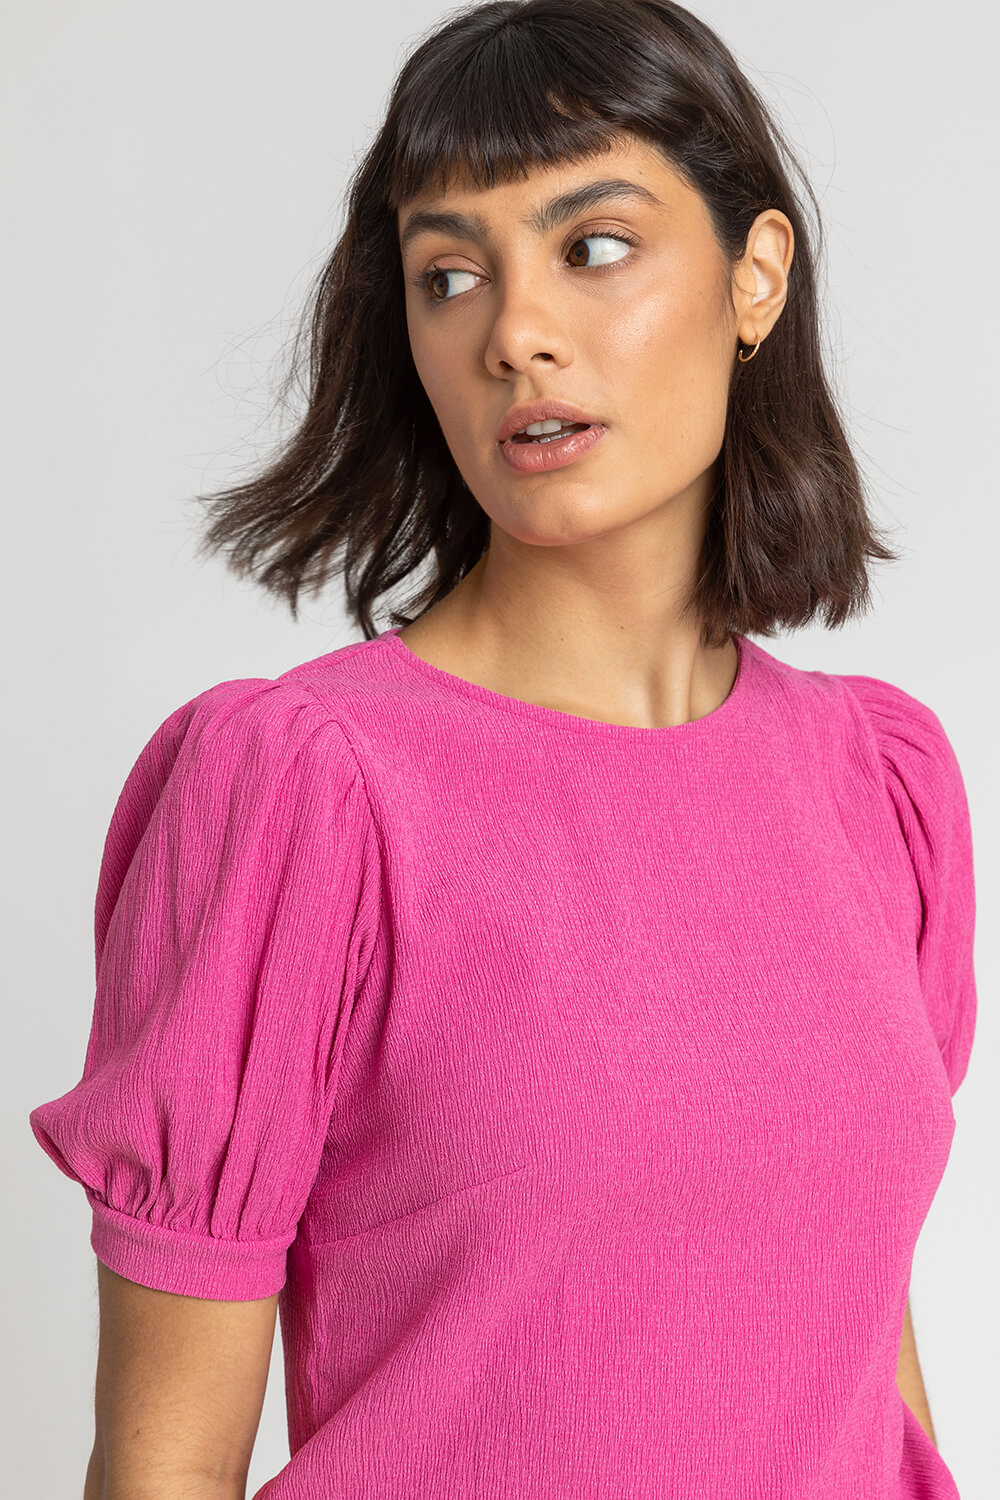 PINK Textured Puff Sleeve Jersey Top, Image 4 of 4